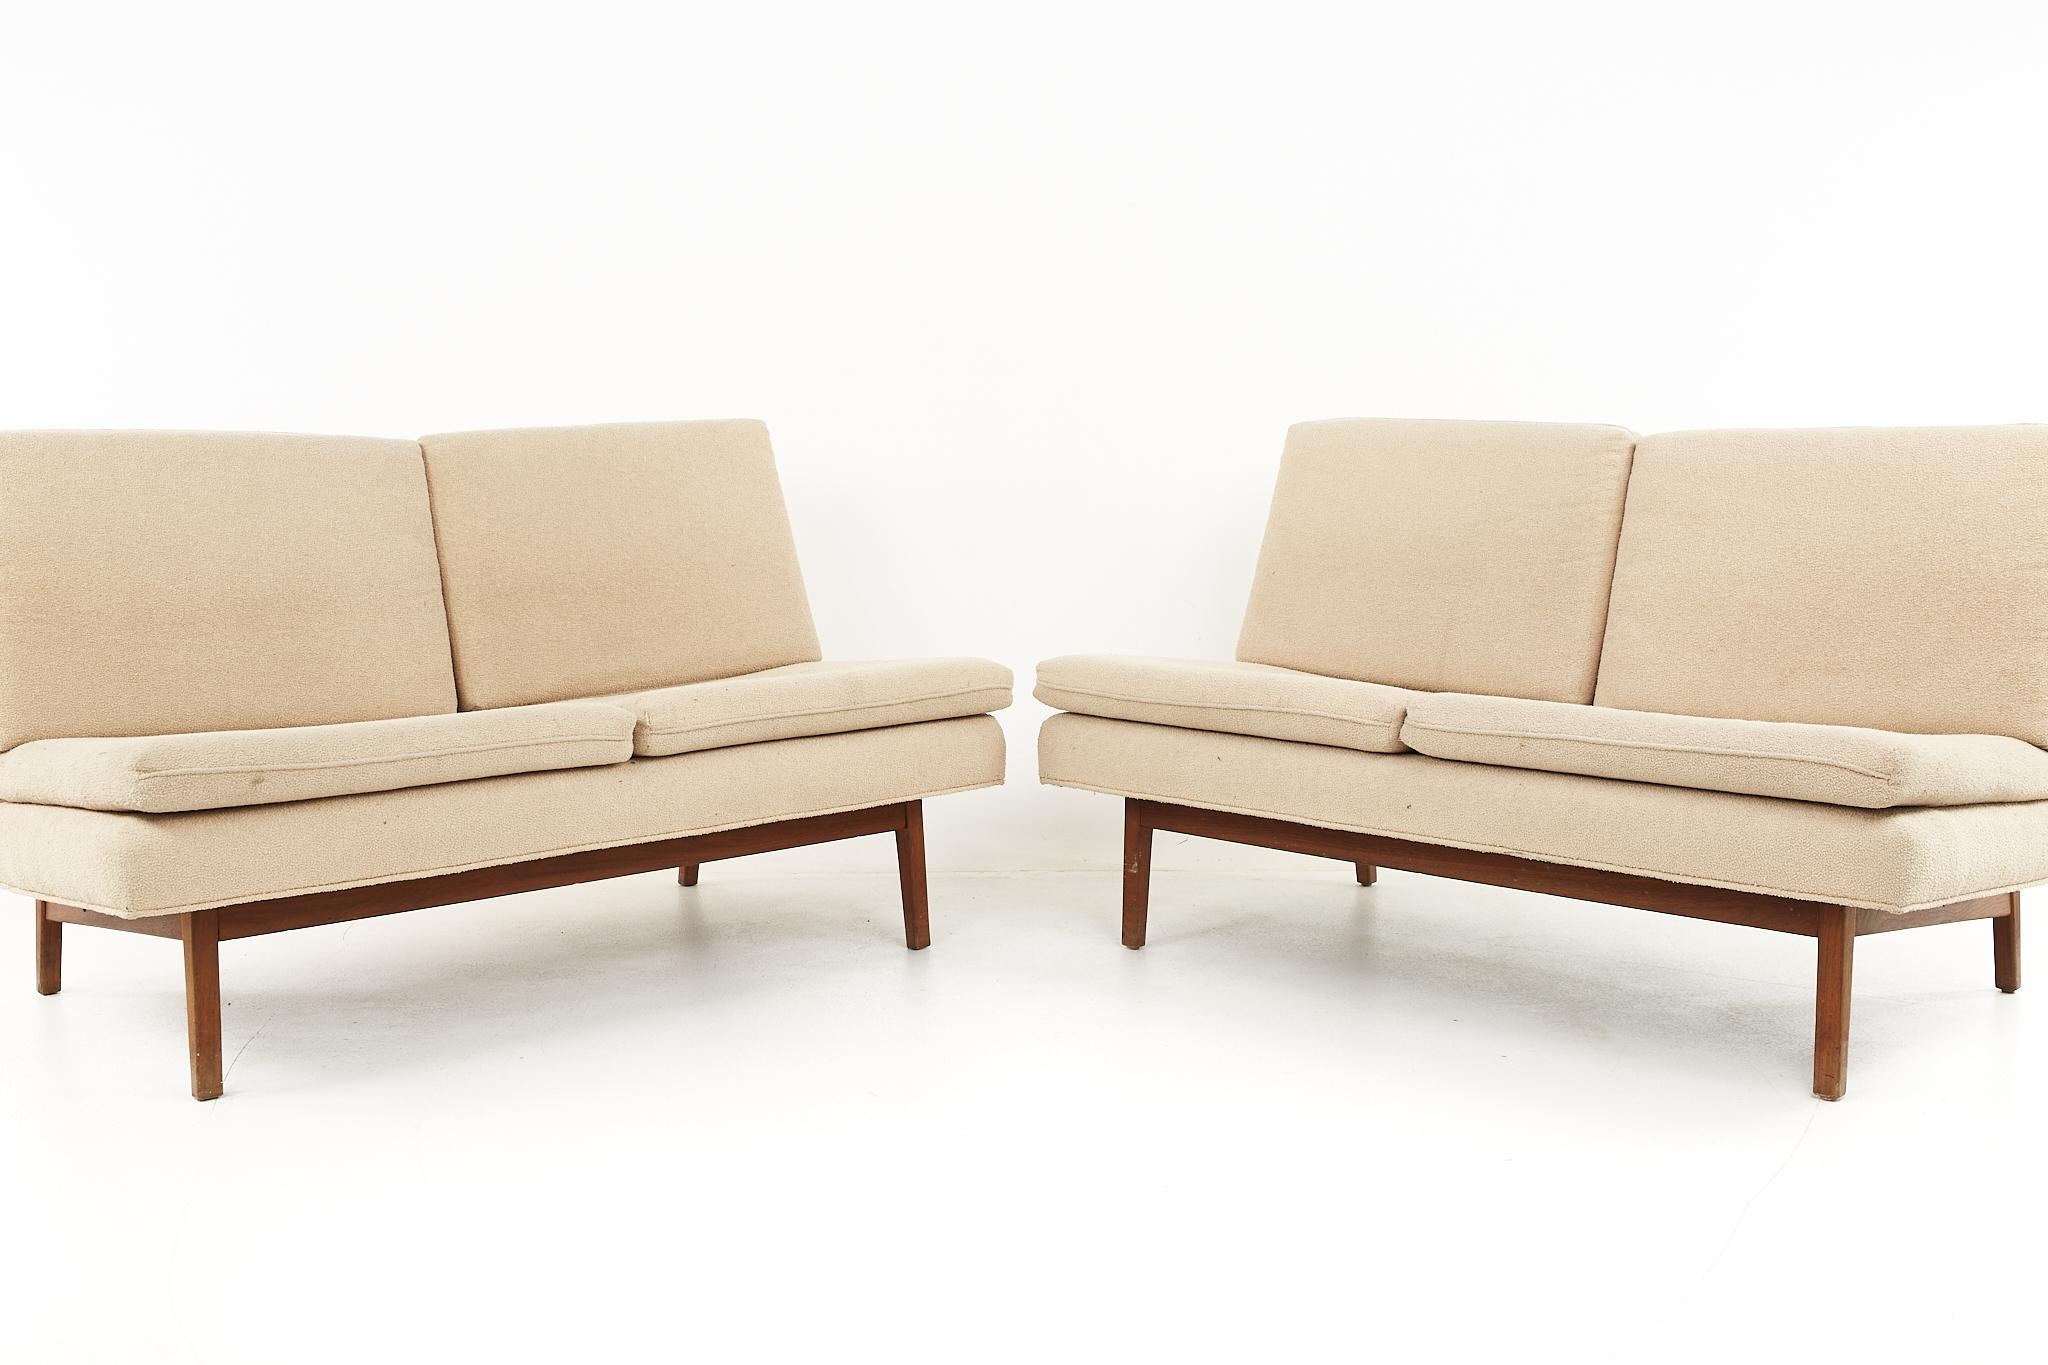 Jack Cartwright for founders mid-century walnut bracket sofas - a pair

Each sofa measures: 53 wide x 30 deep x 31 high, with a seat height of 17.5 inches 

All pieces of furniture can be had in what we call restored vintage condition. That